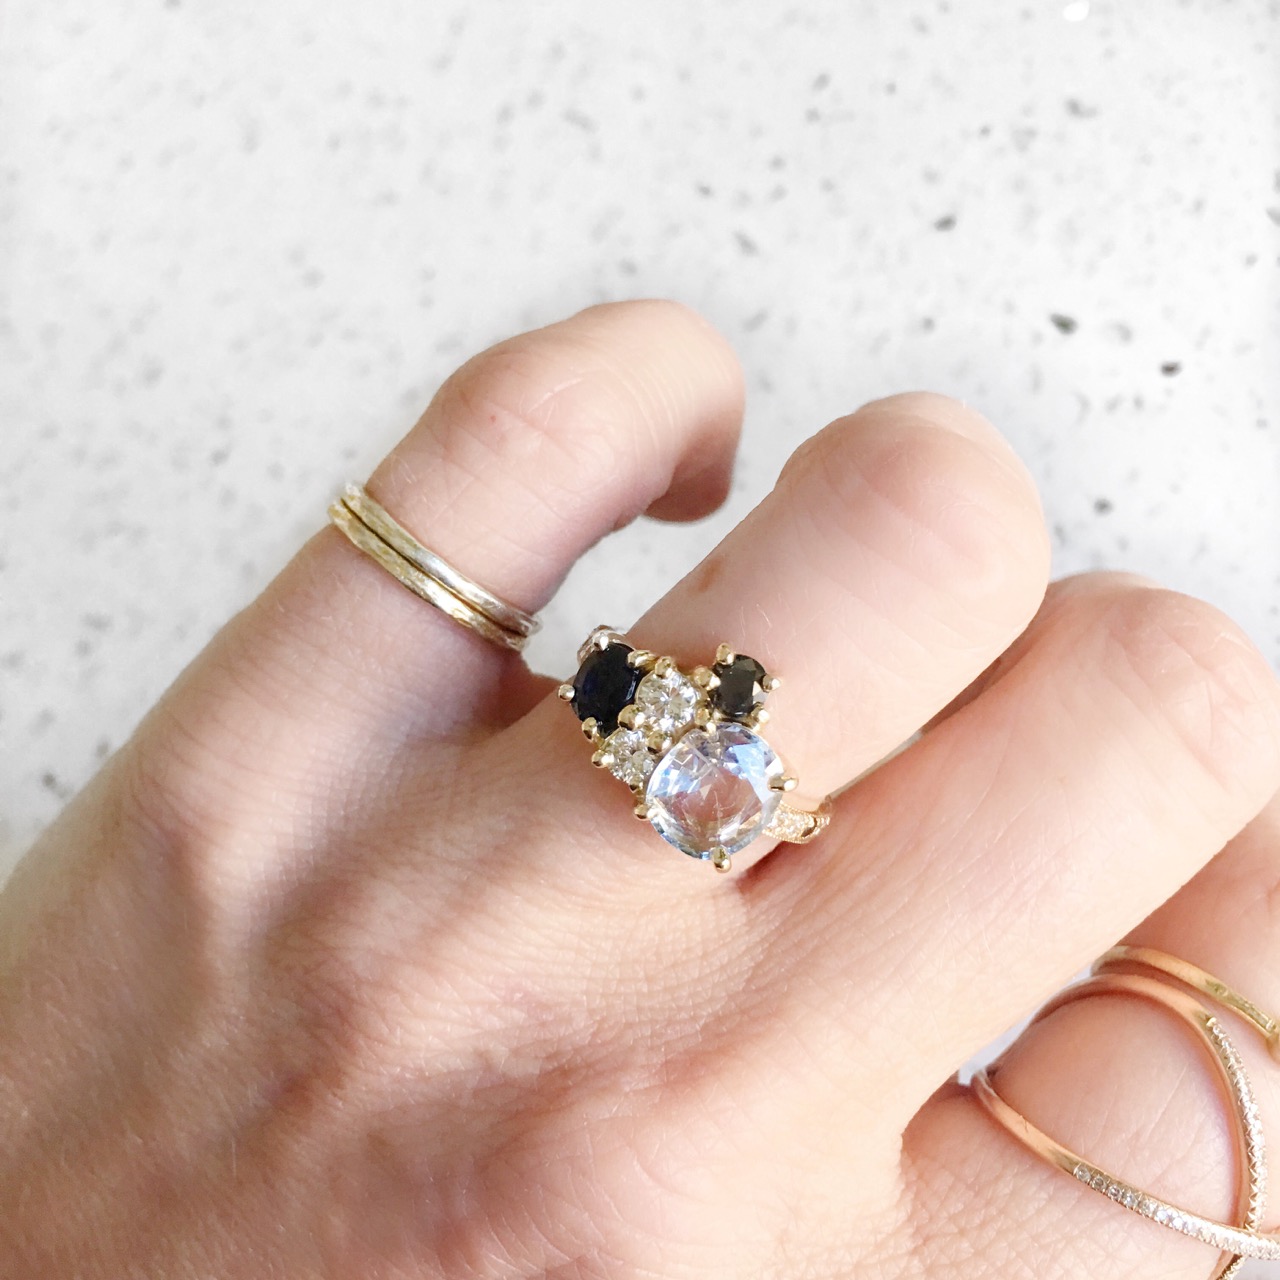 designing an engagement ring from jewelry you already own